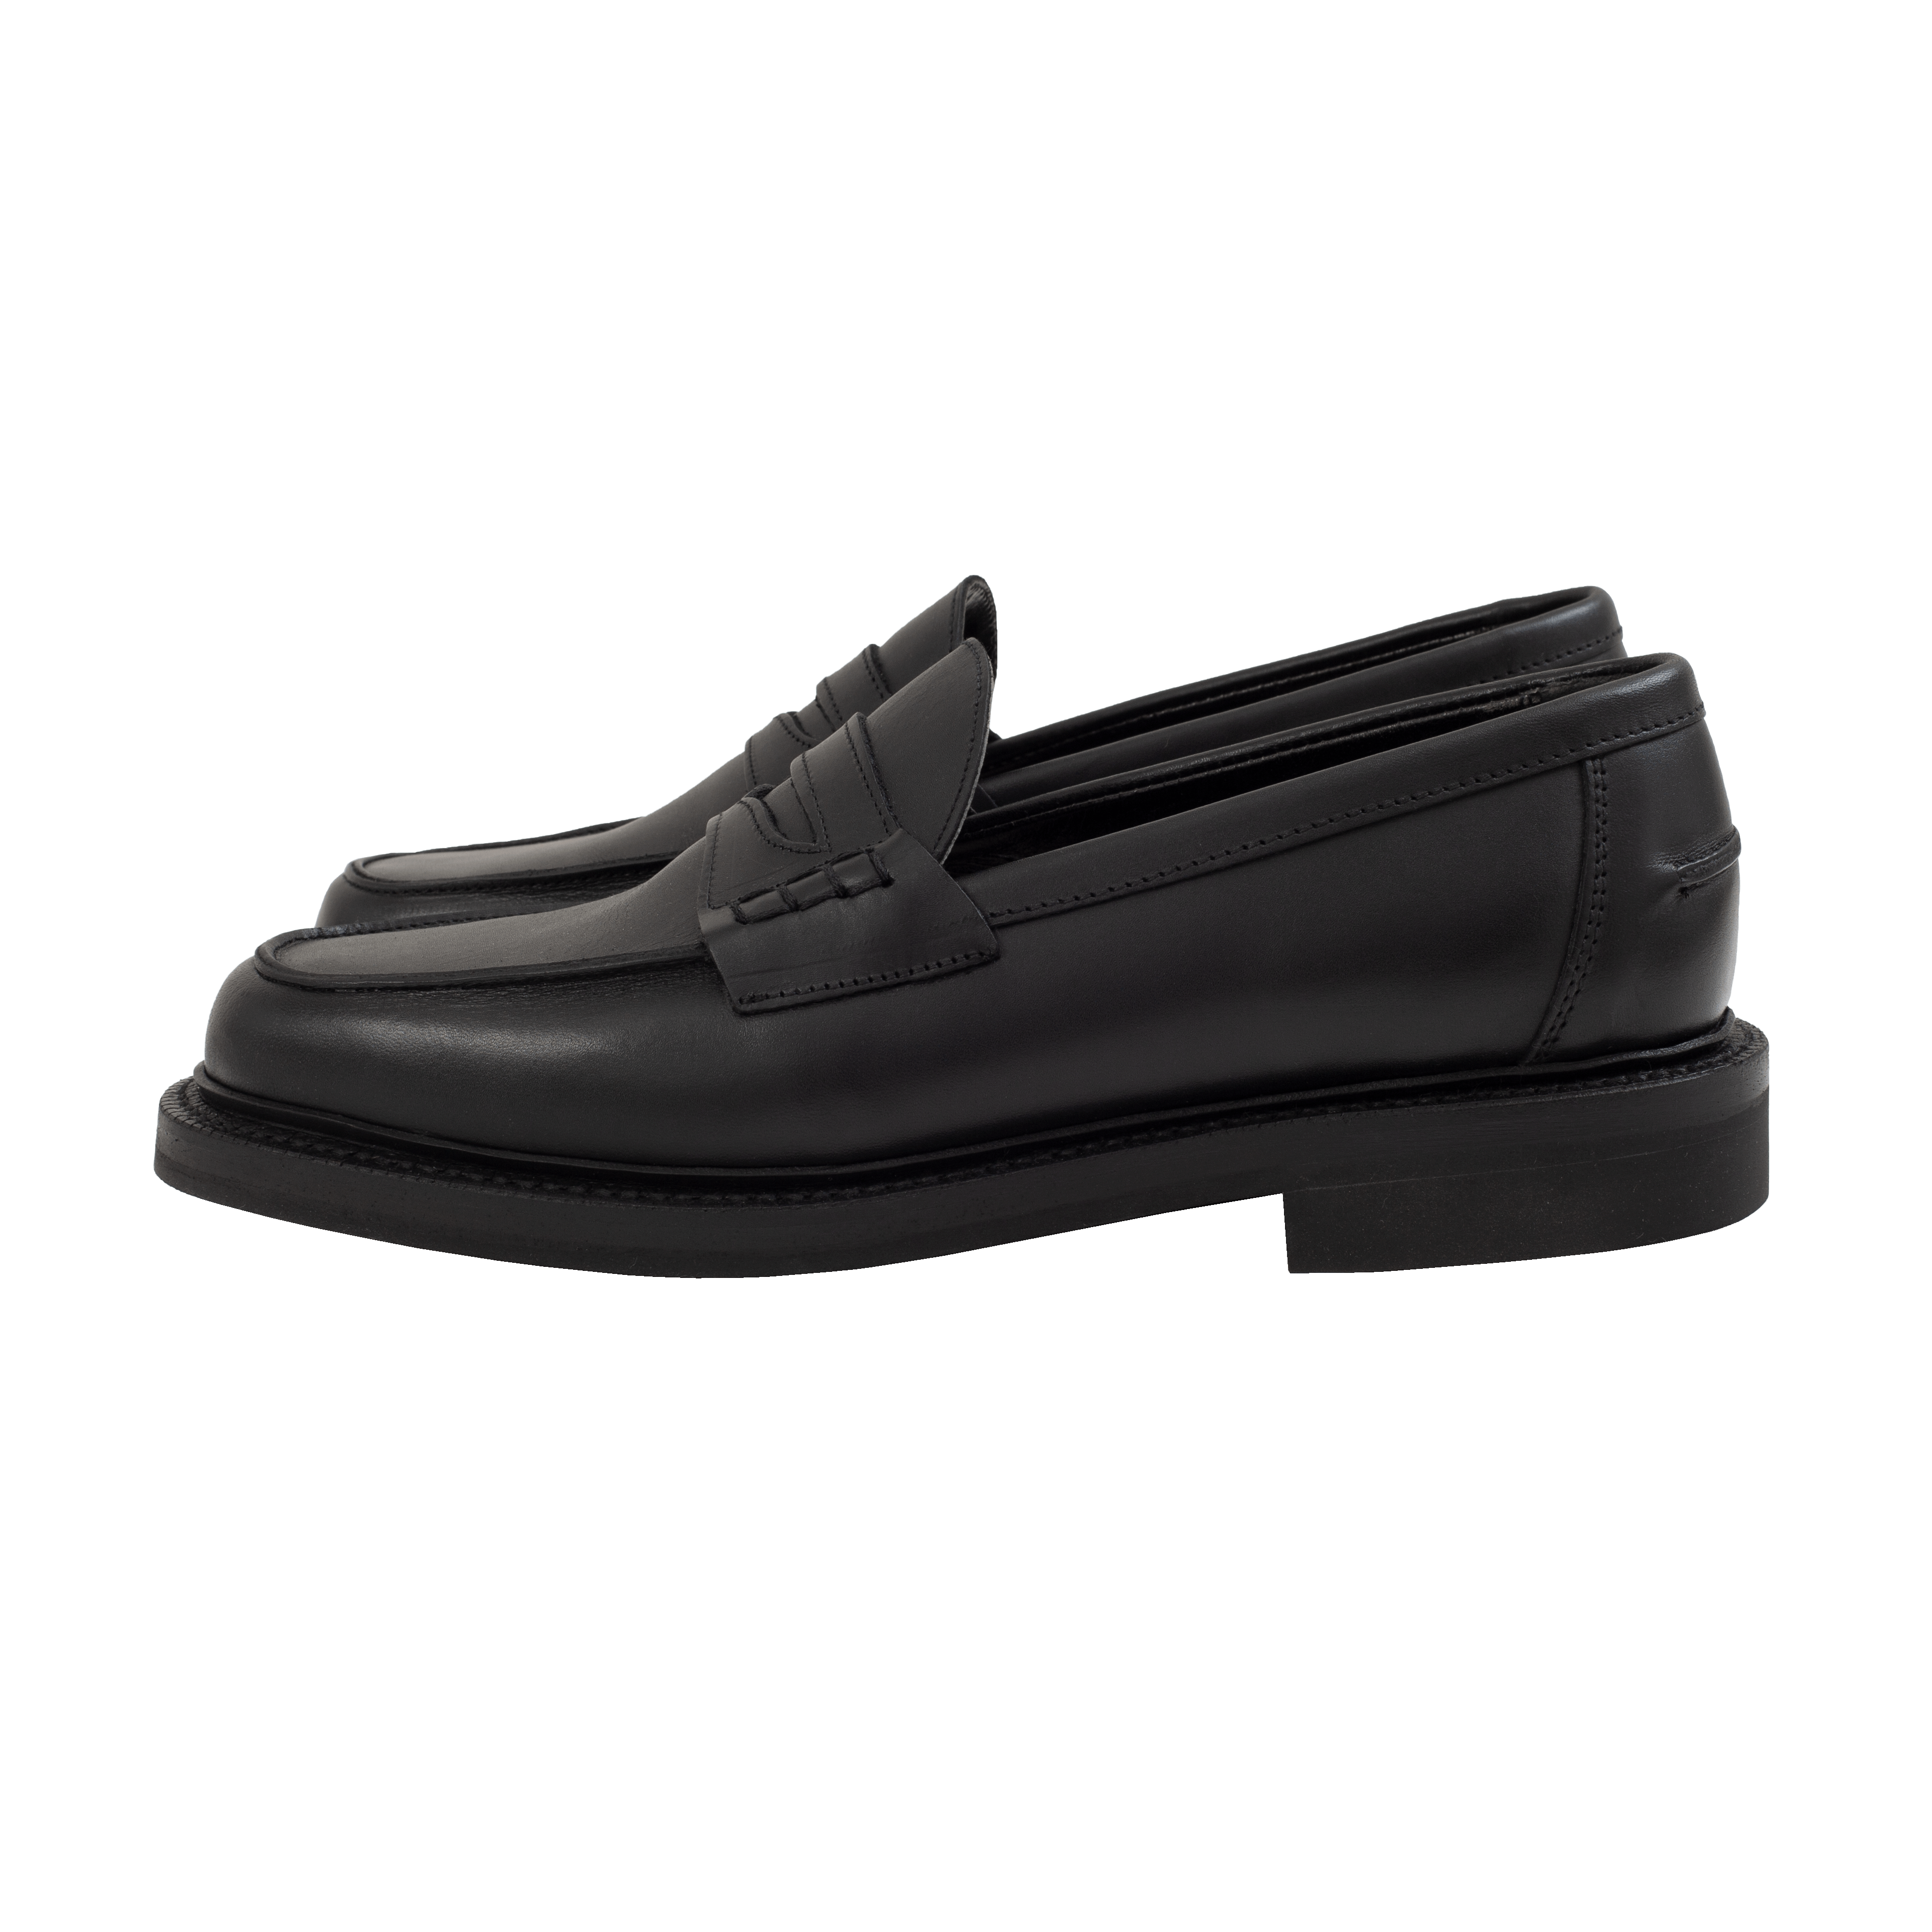 Peaceful Beef Roll Loafer - Black Waxy Leather - James Coward